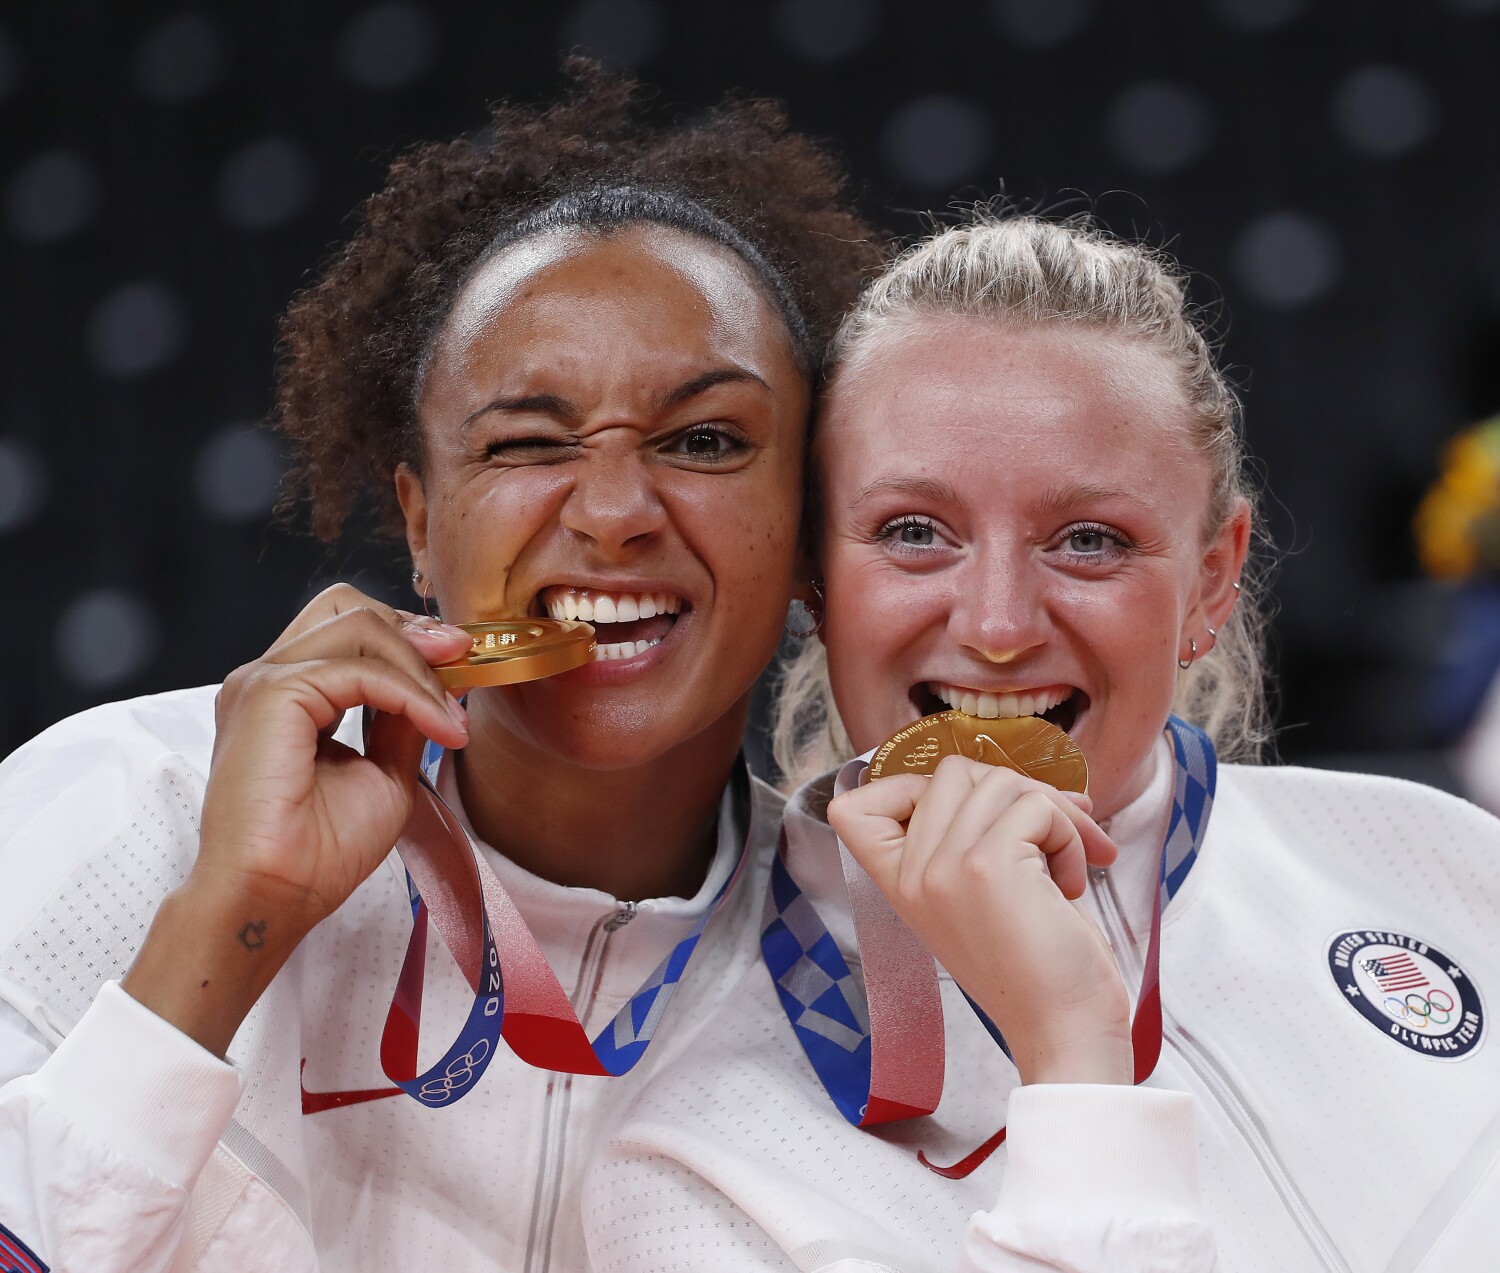 Olympic volleyball player's gold medal stolen from her car in Anaheim